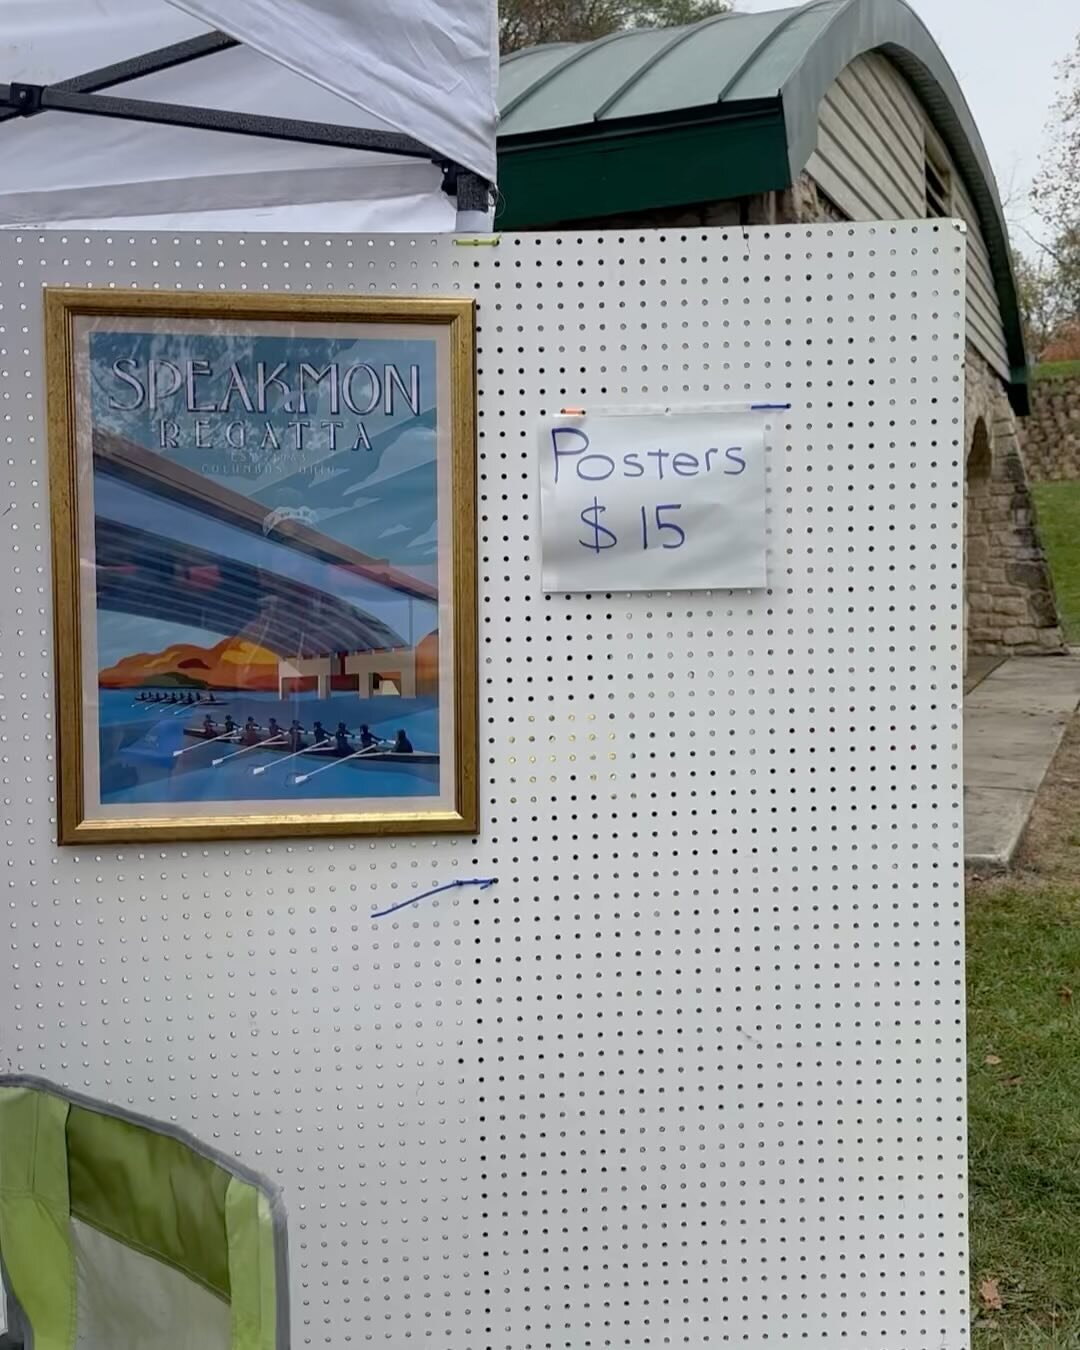 Come by your poster before you leave!! Stays open till 5ish by the launch dock!!
#speakmonregatta